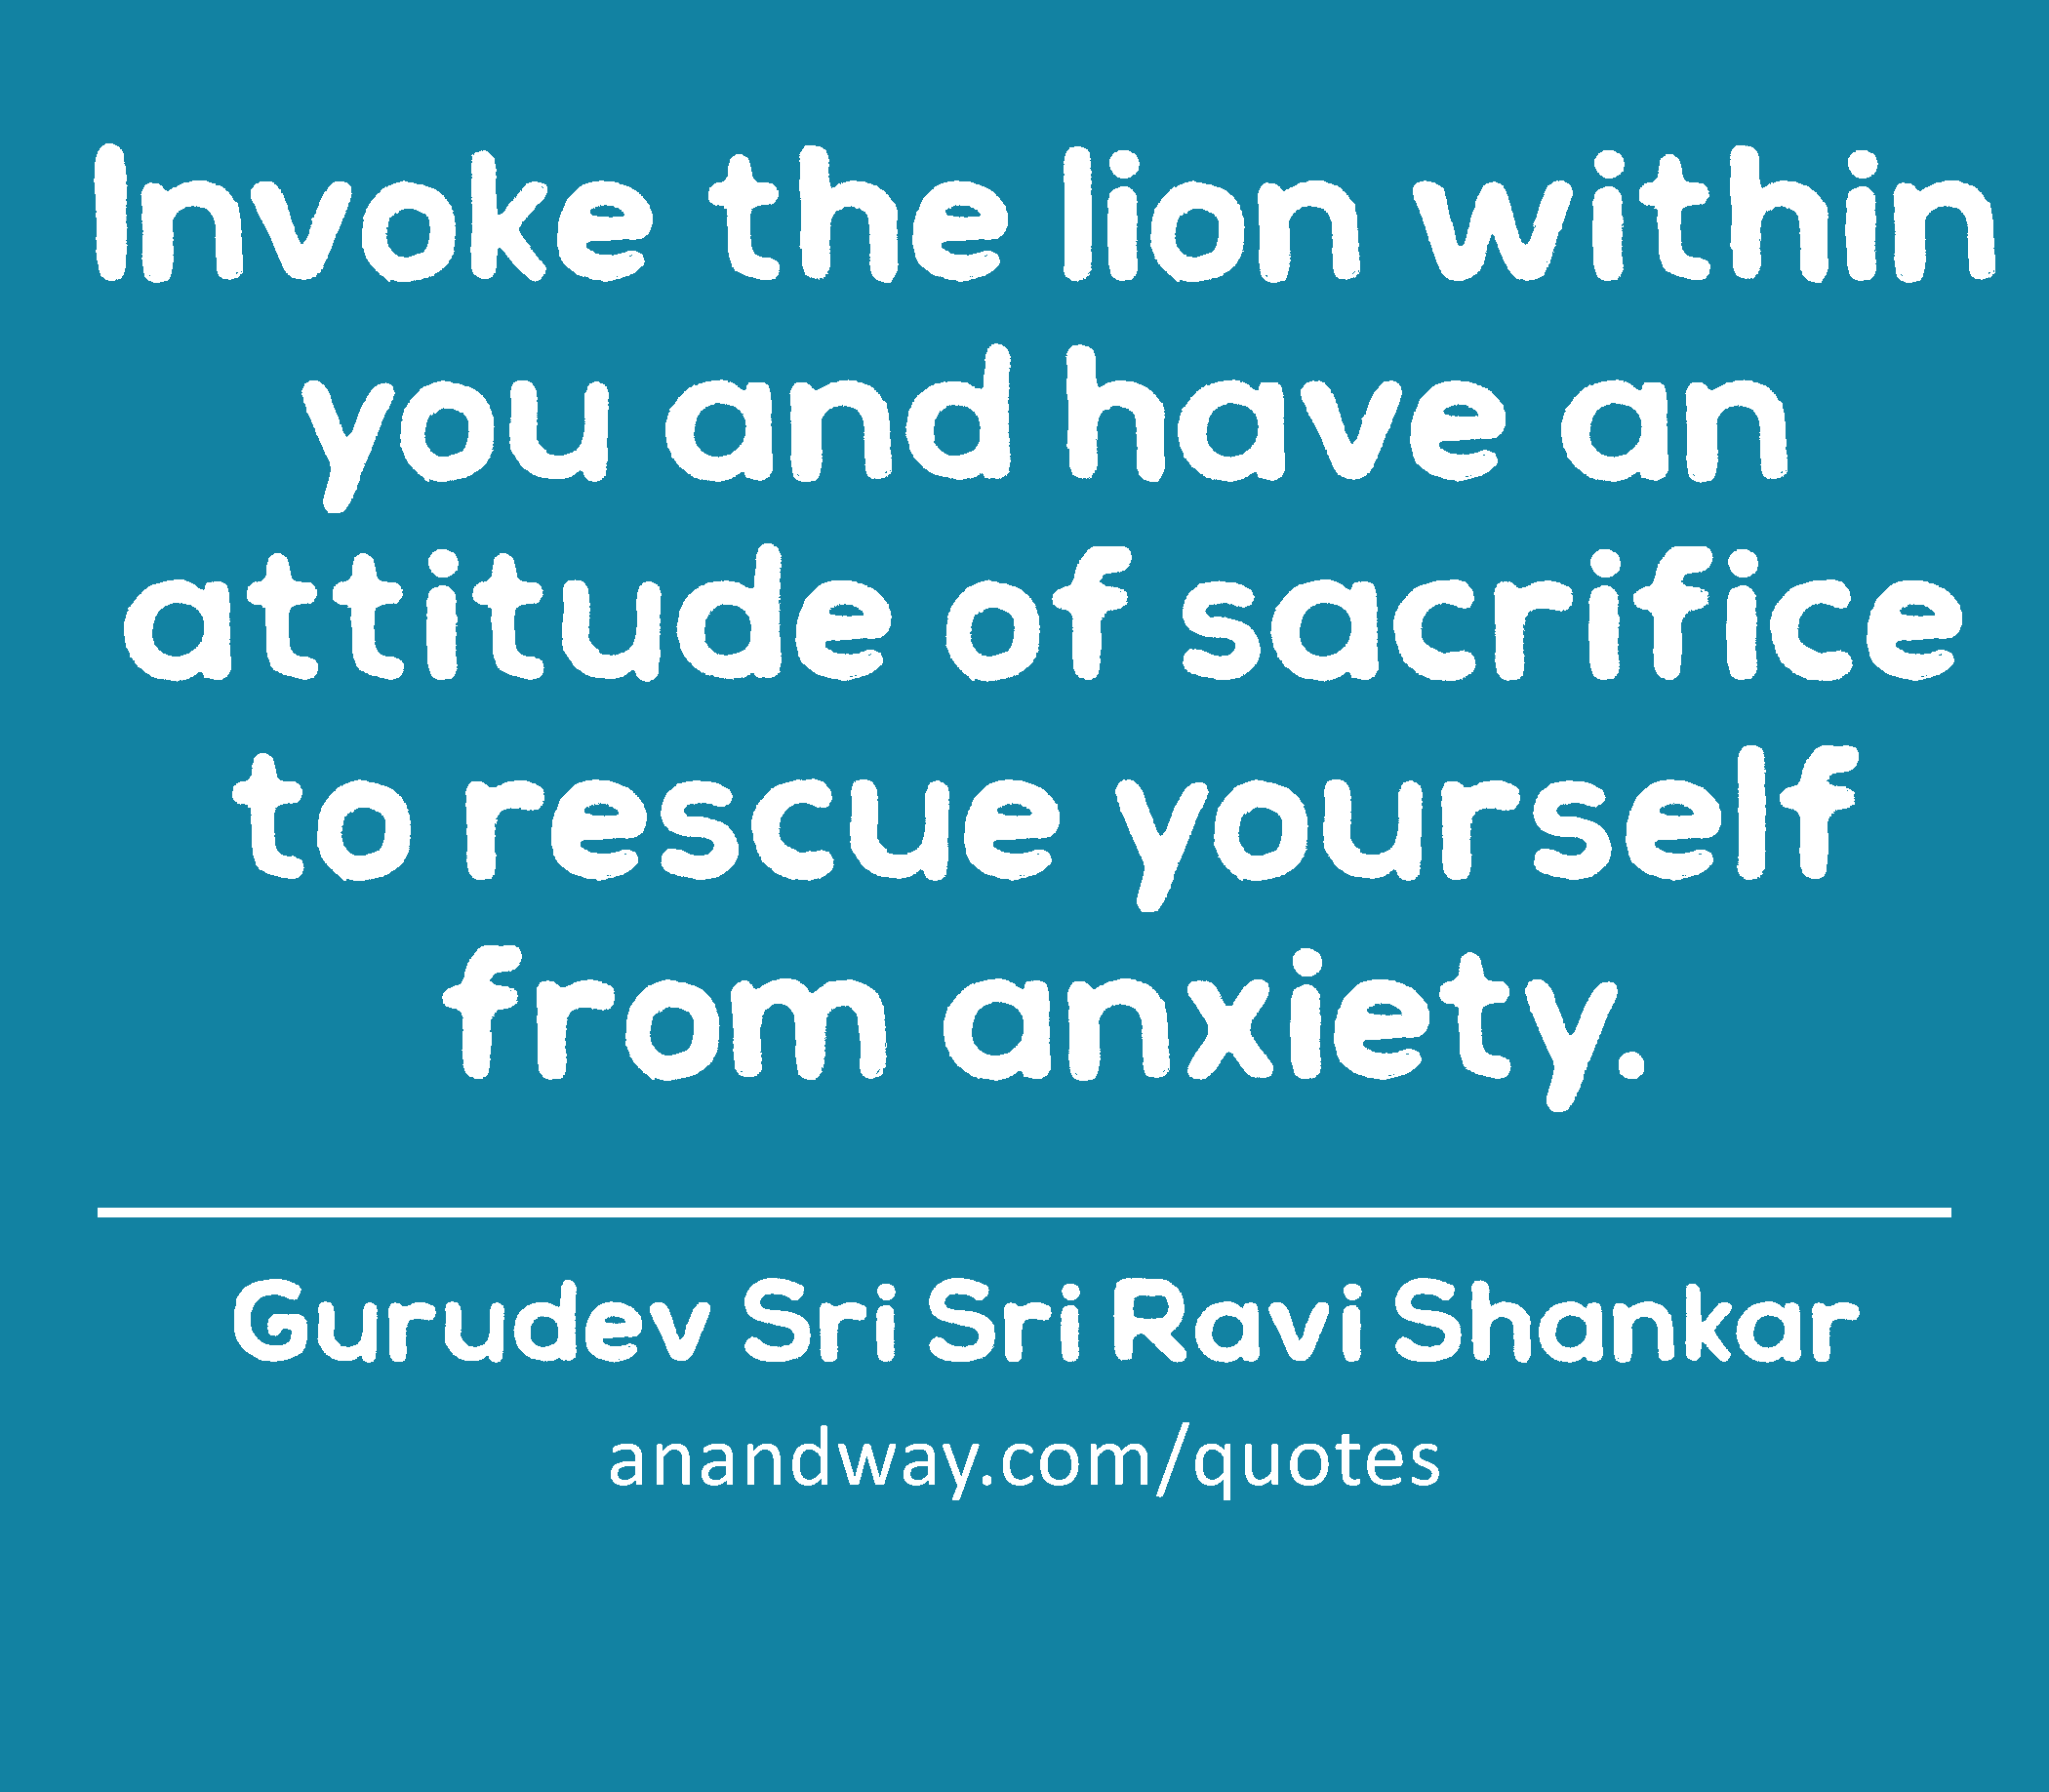 Invoke the lion within you and have an attitude of sacrifice to rescue yourself from anxiety.
 -Gurudev Sri Sri Ravi Shankar